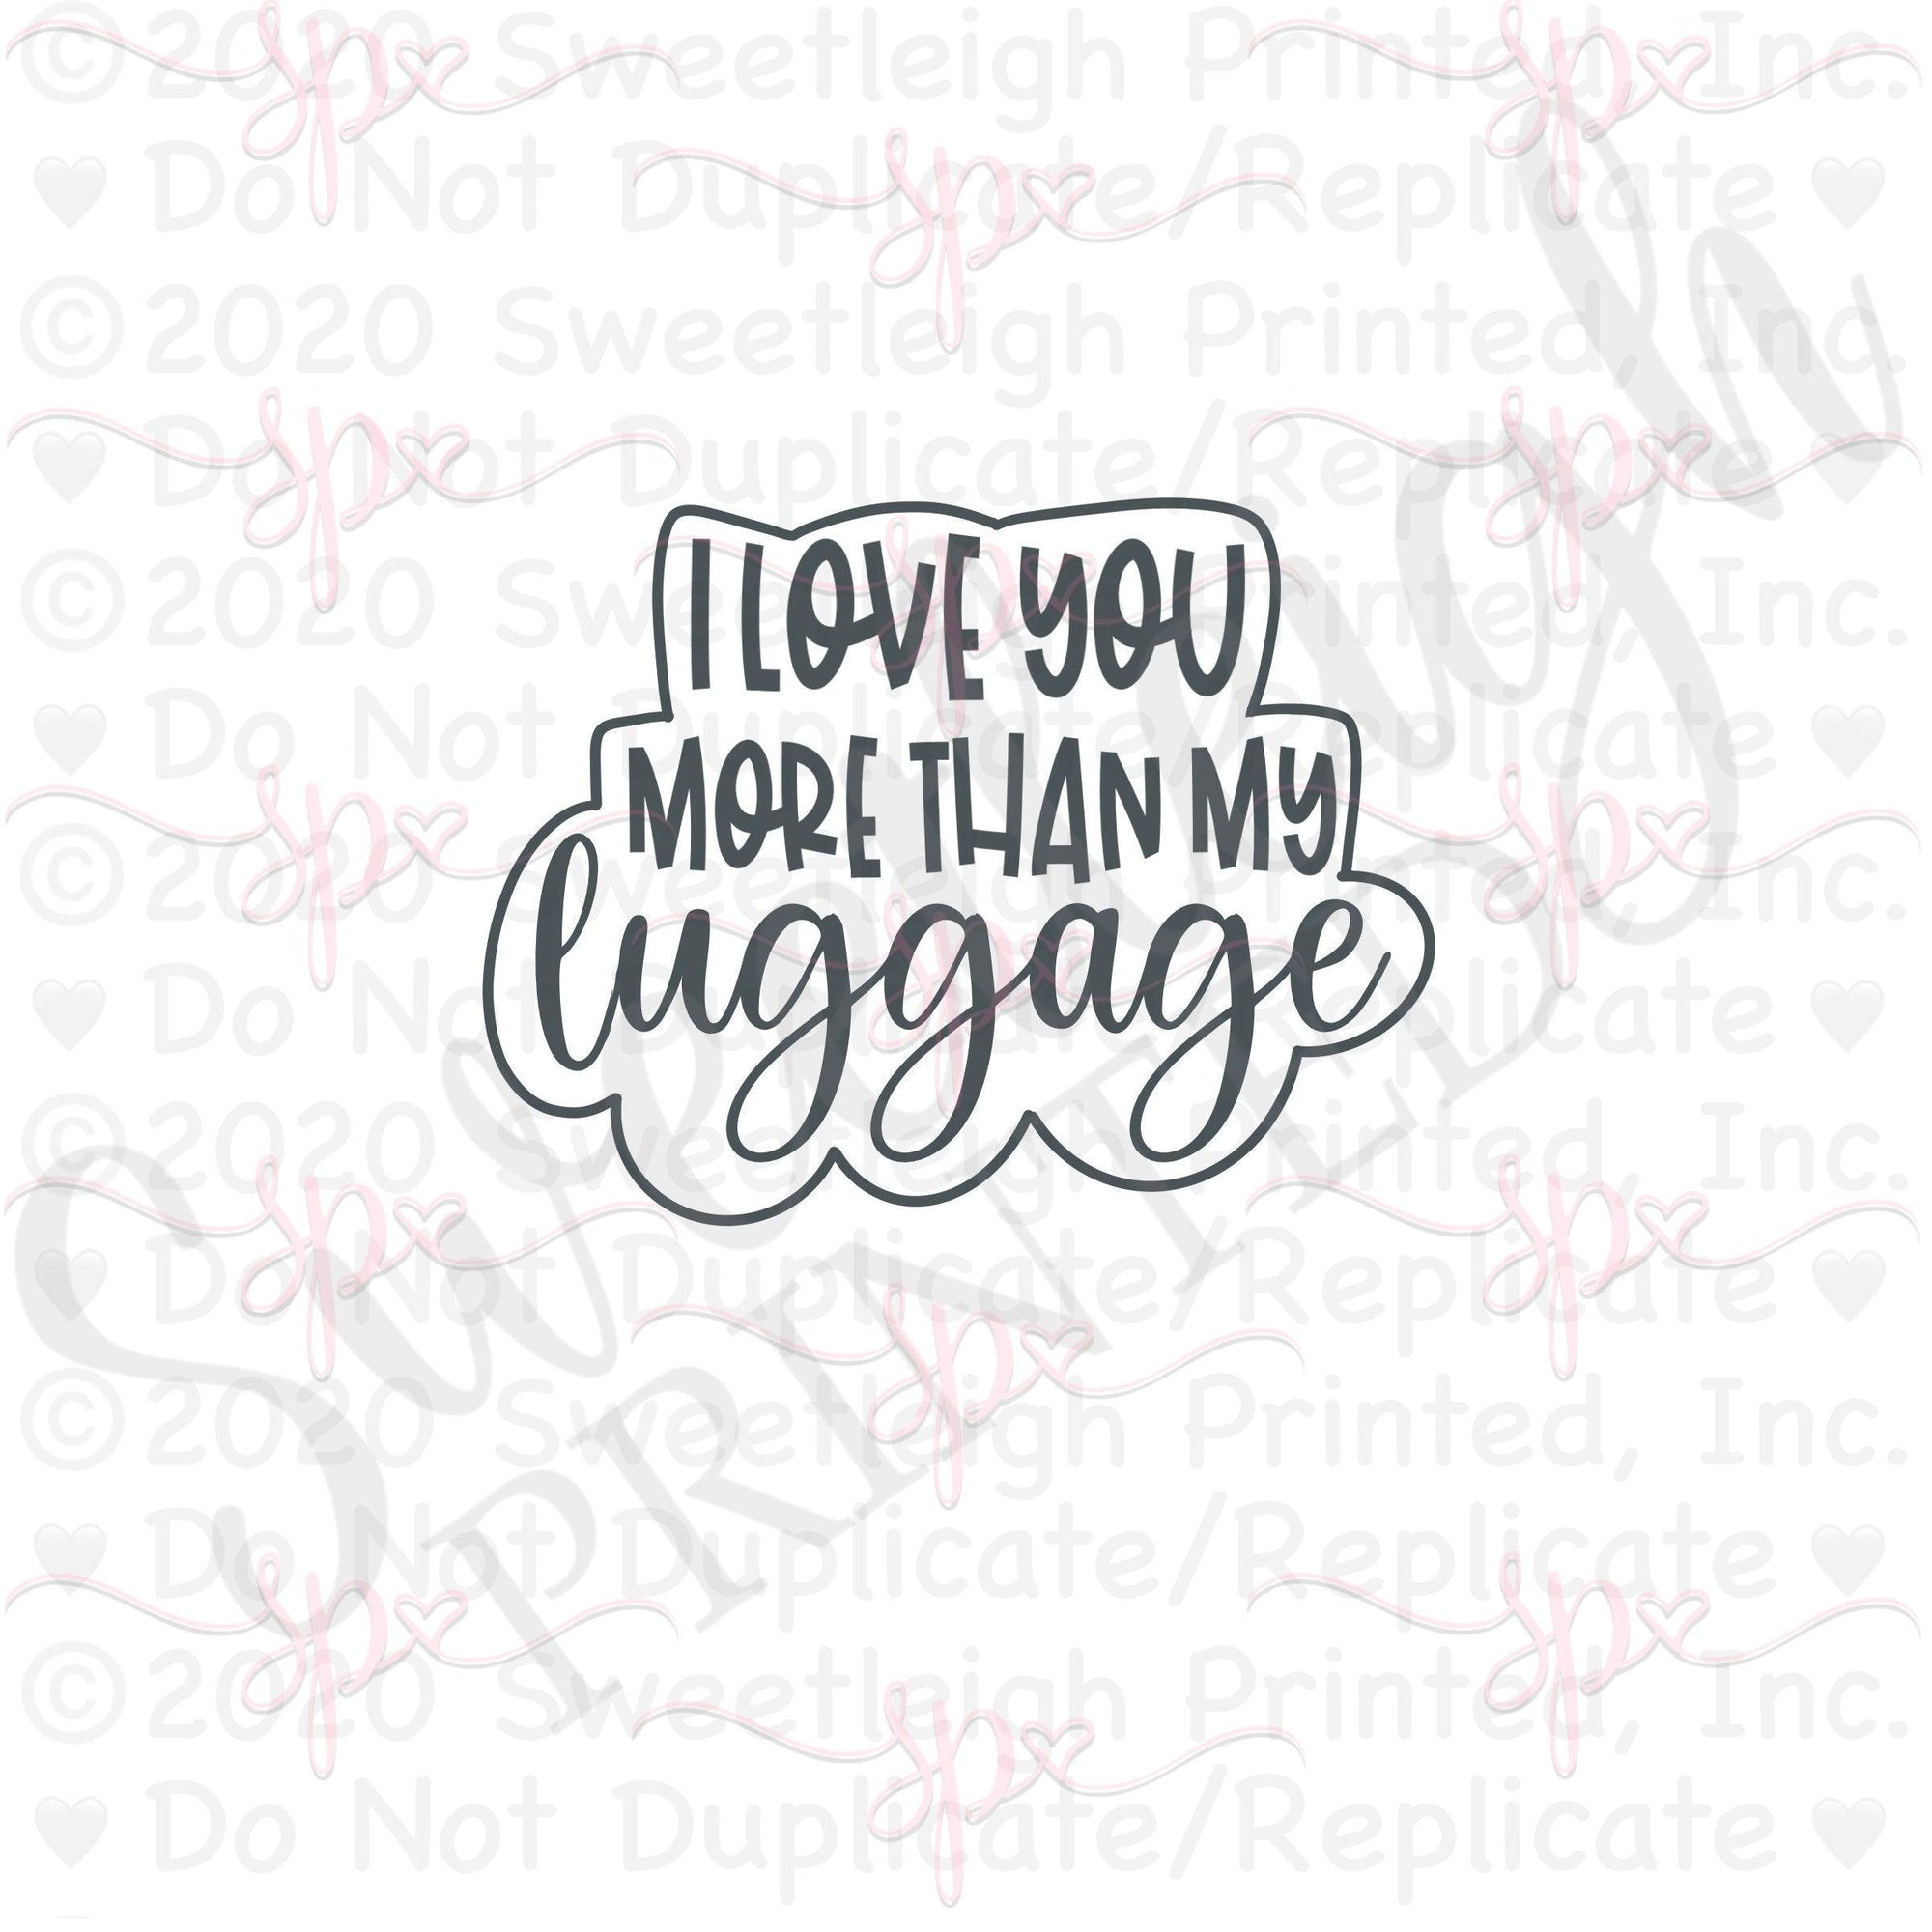 Hand Lettered I Love You More Than My Luggage Cookie Cutter - Sweetleigh 